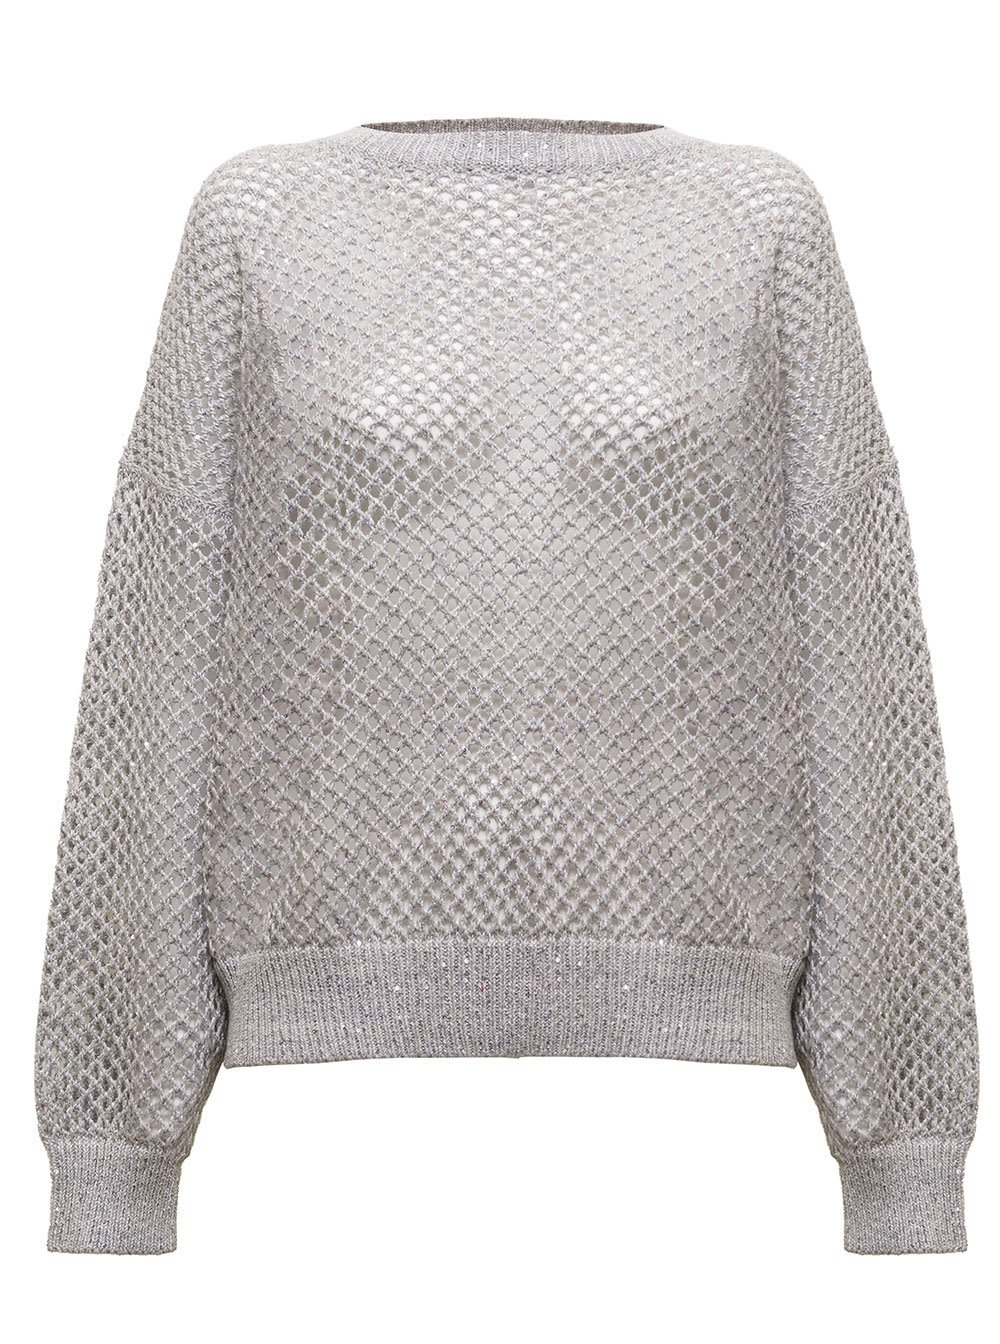 Brunello Cucinelli Grey Openwork Fabric Sweater With Sequins Woman